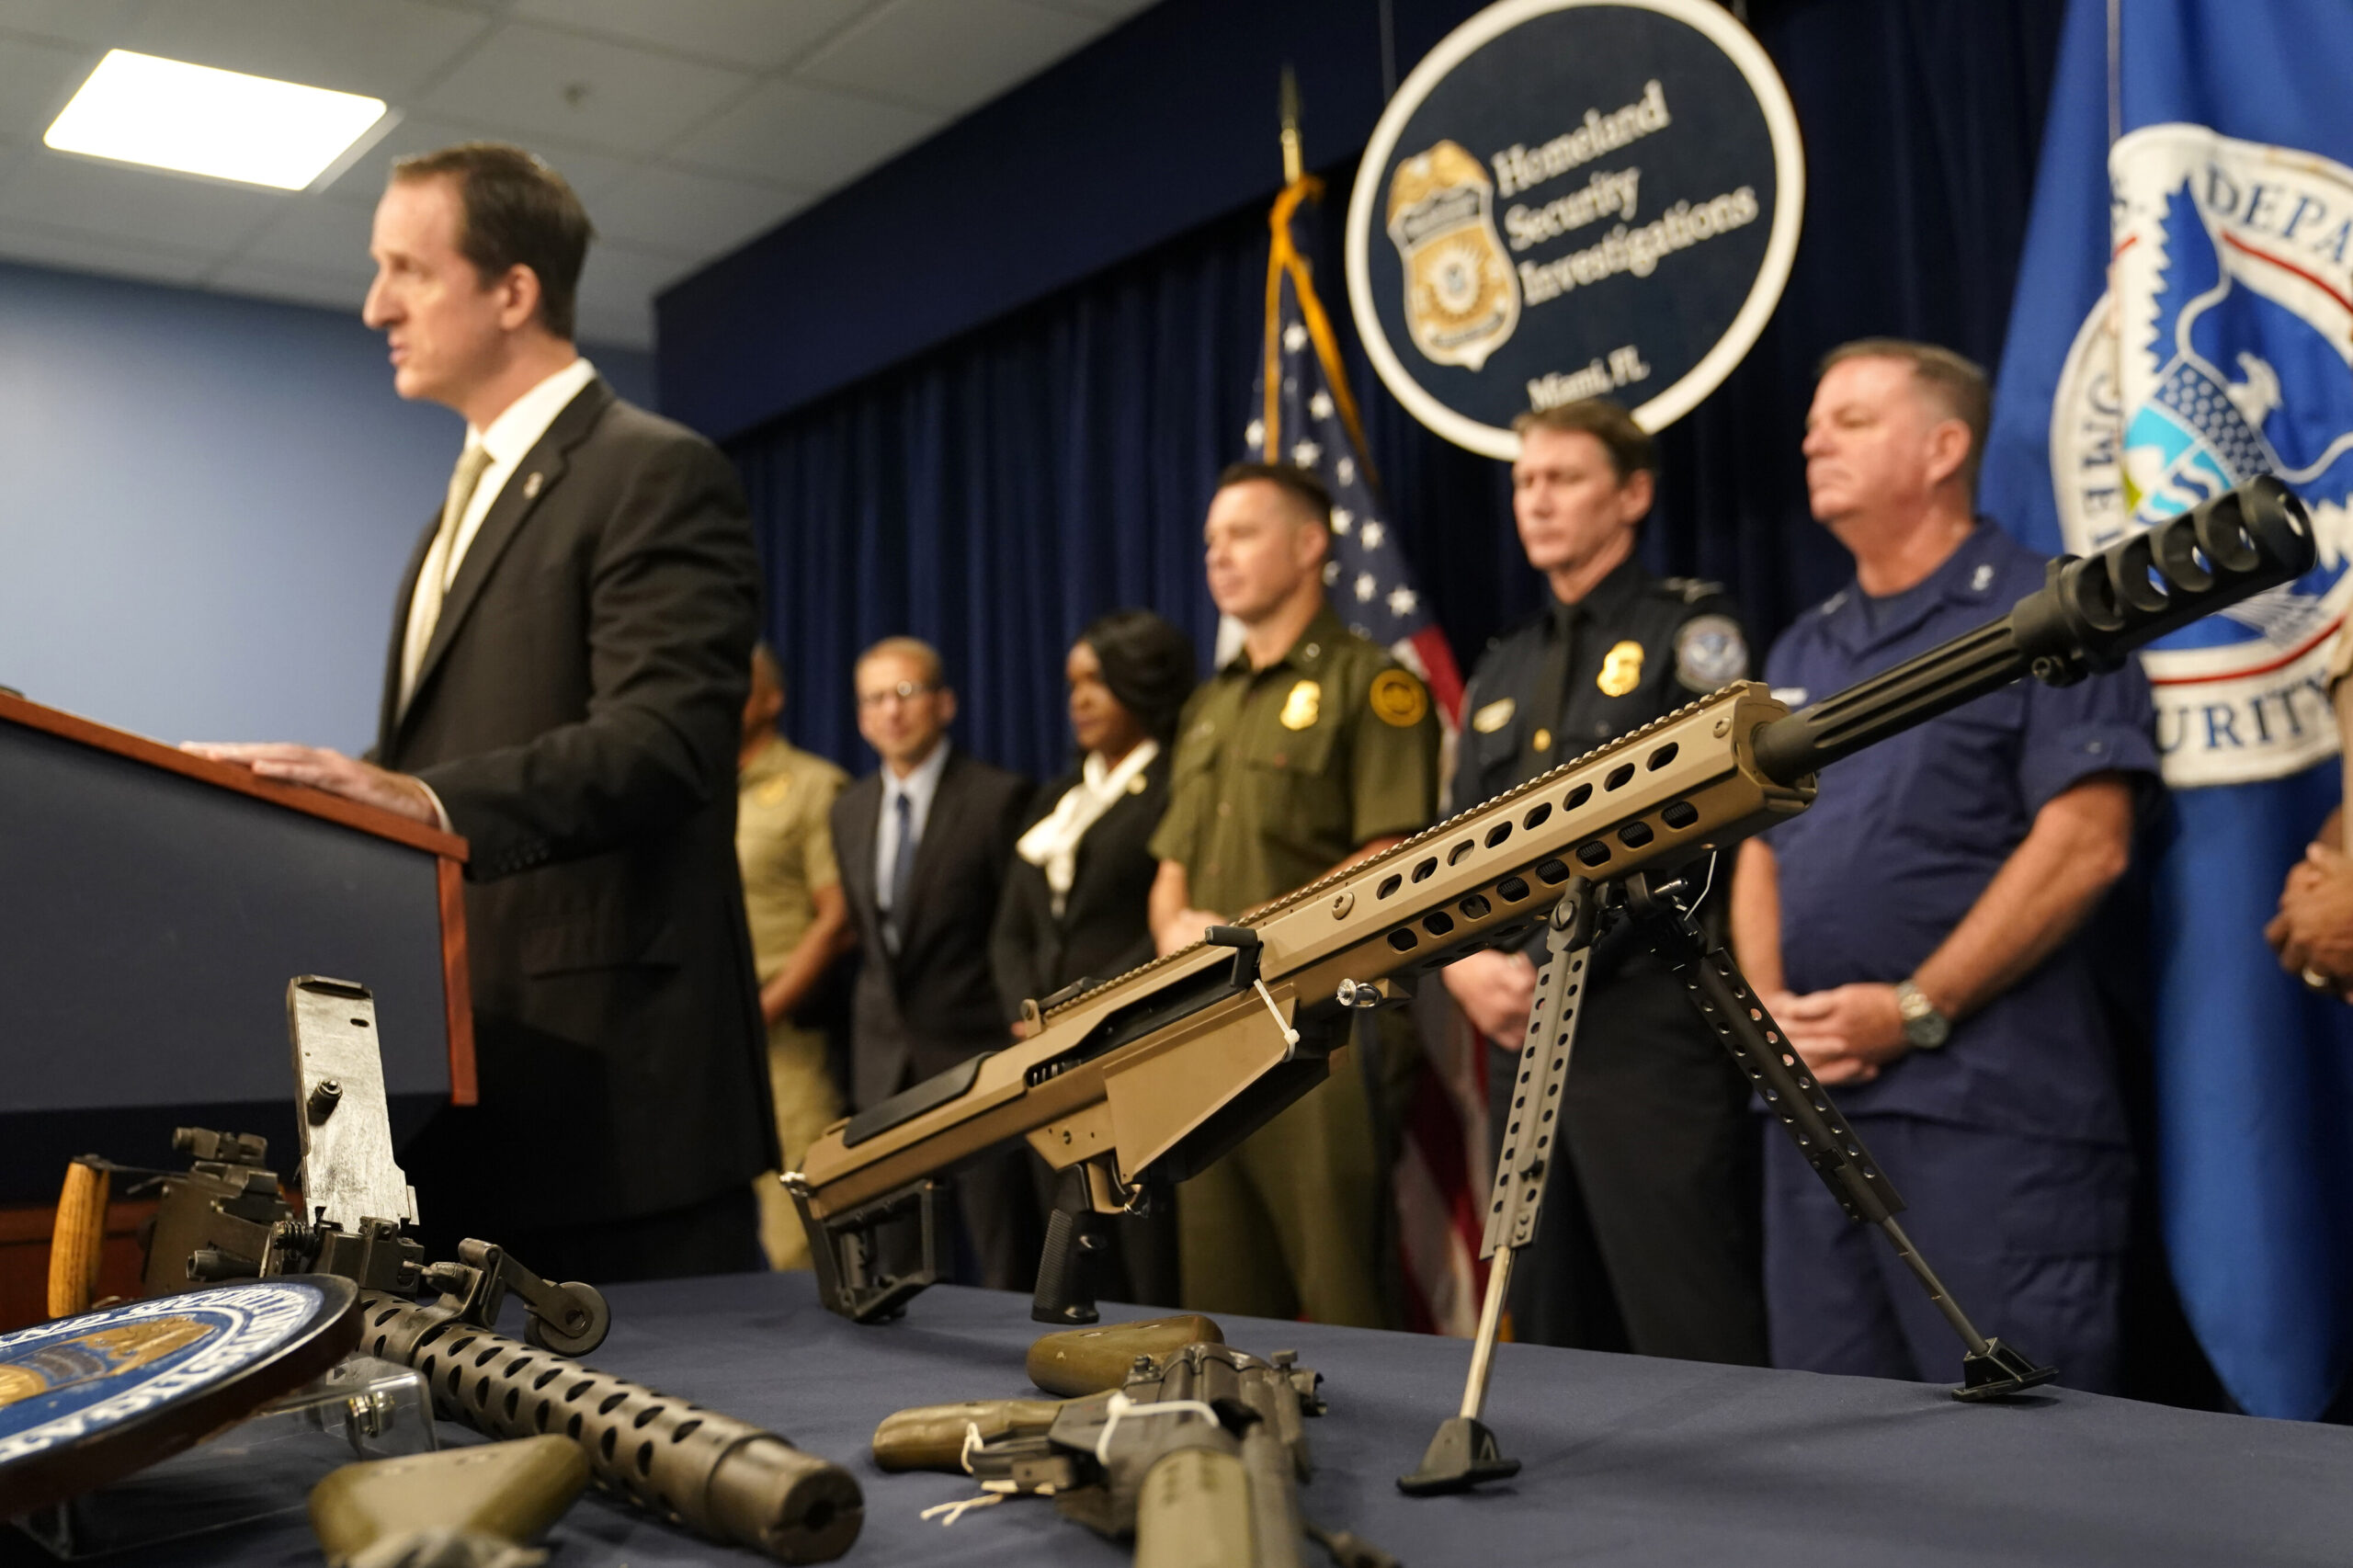 A Barrett .50 caliber sniper rifle is displayed during a news conference at the Homeland Security Investigations Miami Field Office